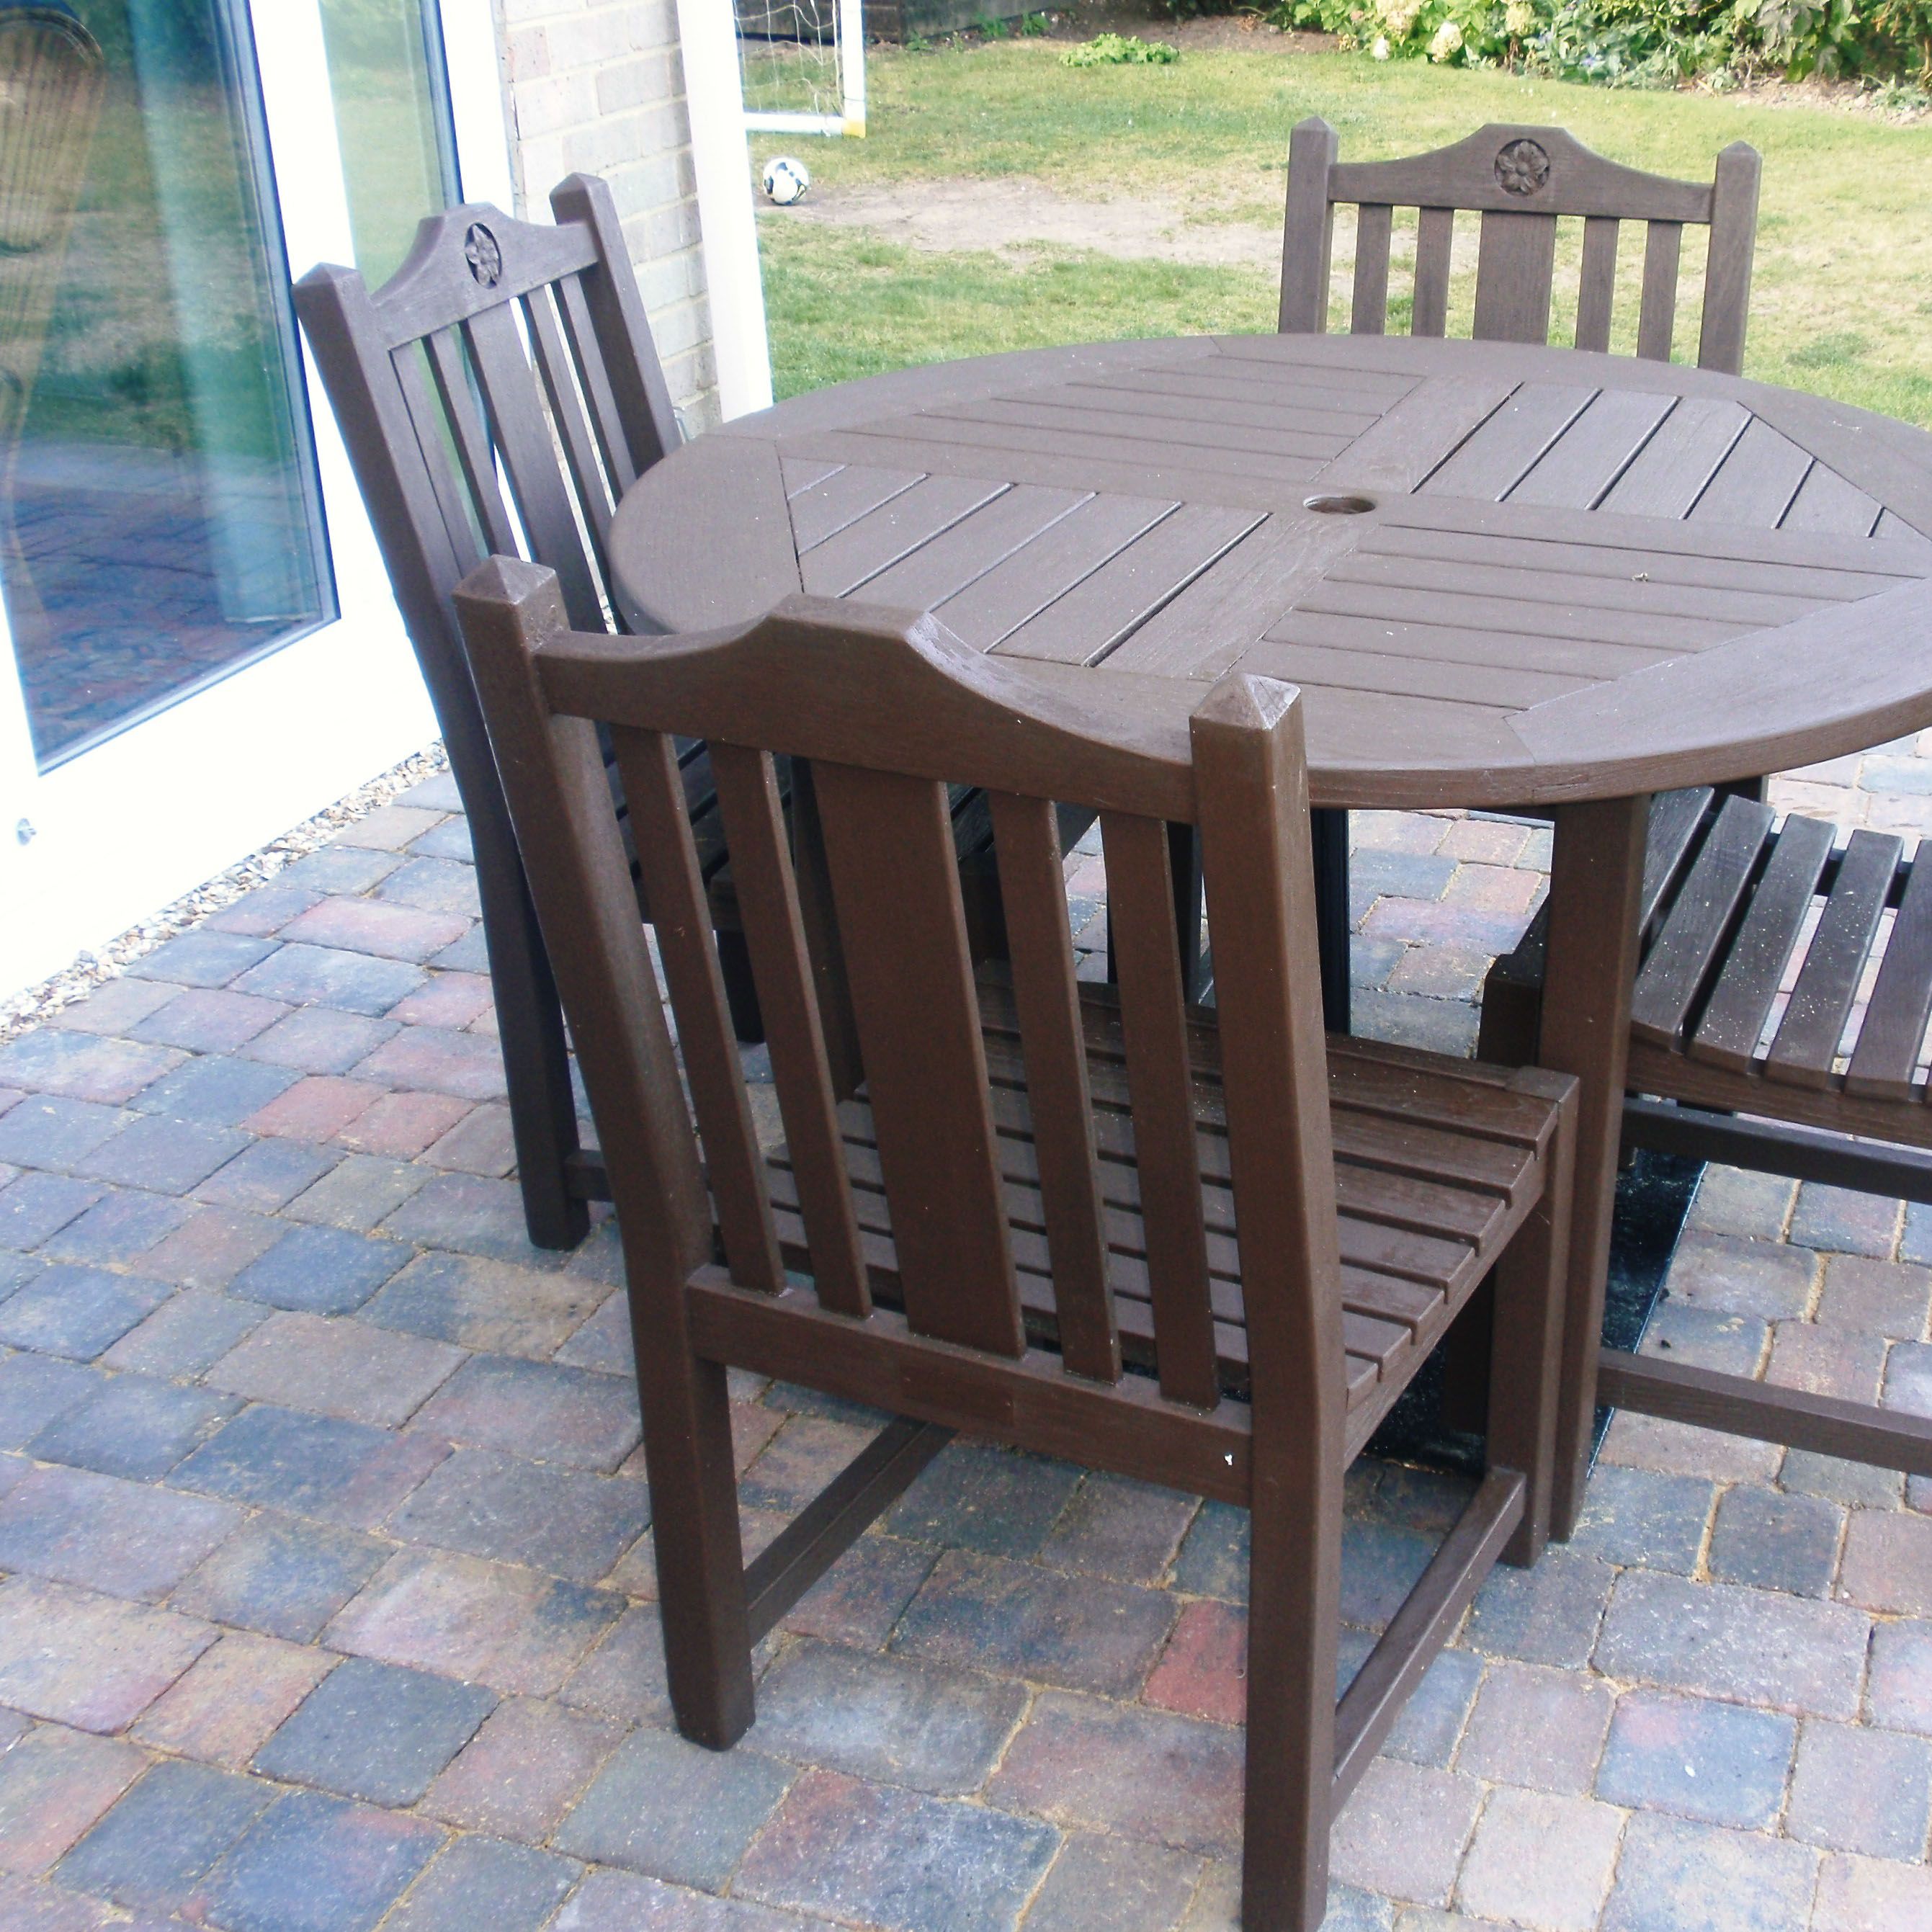 Perfect for a driveway or a outdoor eating area. This product is versatile and has charm and character.